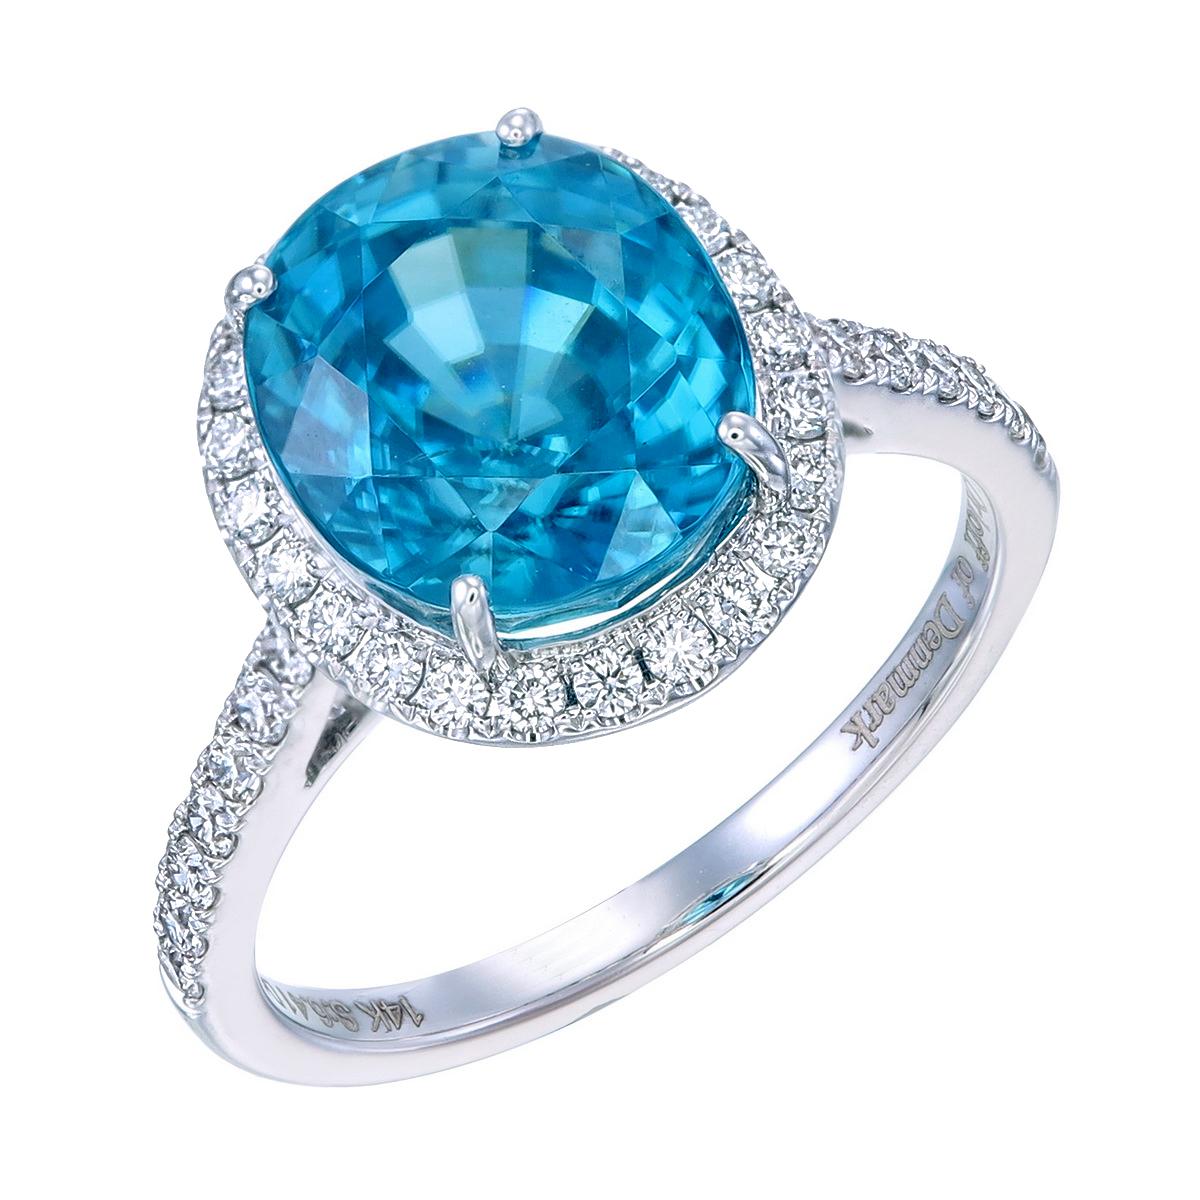 Natural Ocean Blue Zircon Engagement Ring.
This ring, which is set in 14 Karat white gold, features a 6.41 carat oval, natural sky blue zircon bolstered with SI1 diamonds encircling the gem,
extending halfway down the shank.
The combined glimmer of